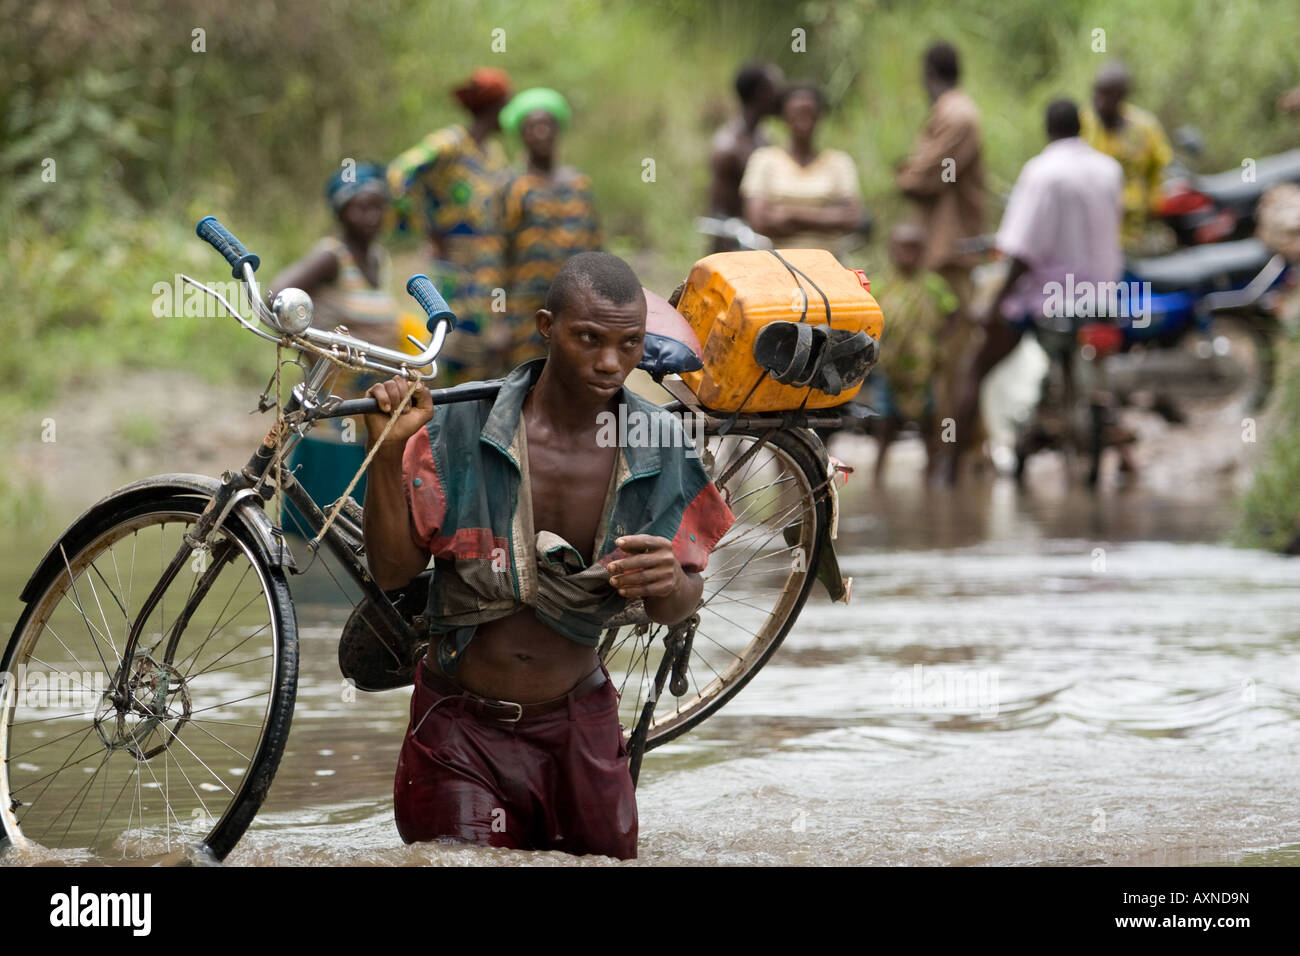 A man carries a bicycle on his shoulder across an overflowing river Stock Photo